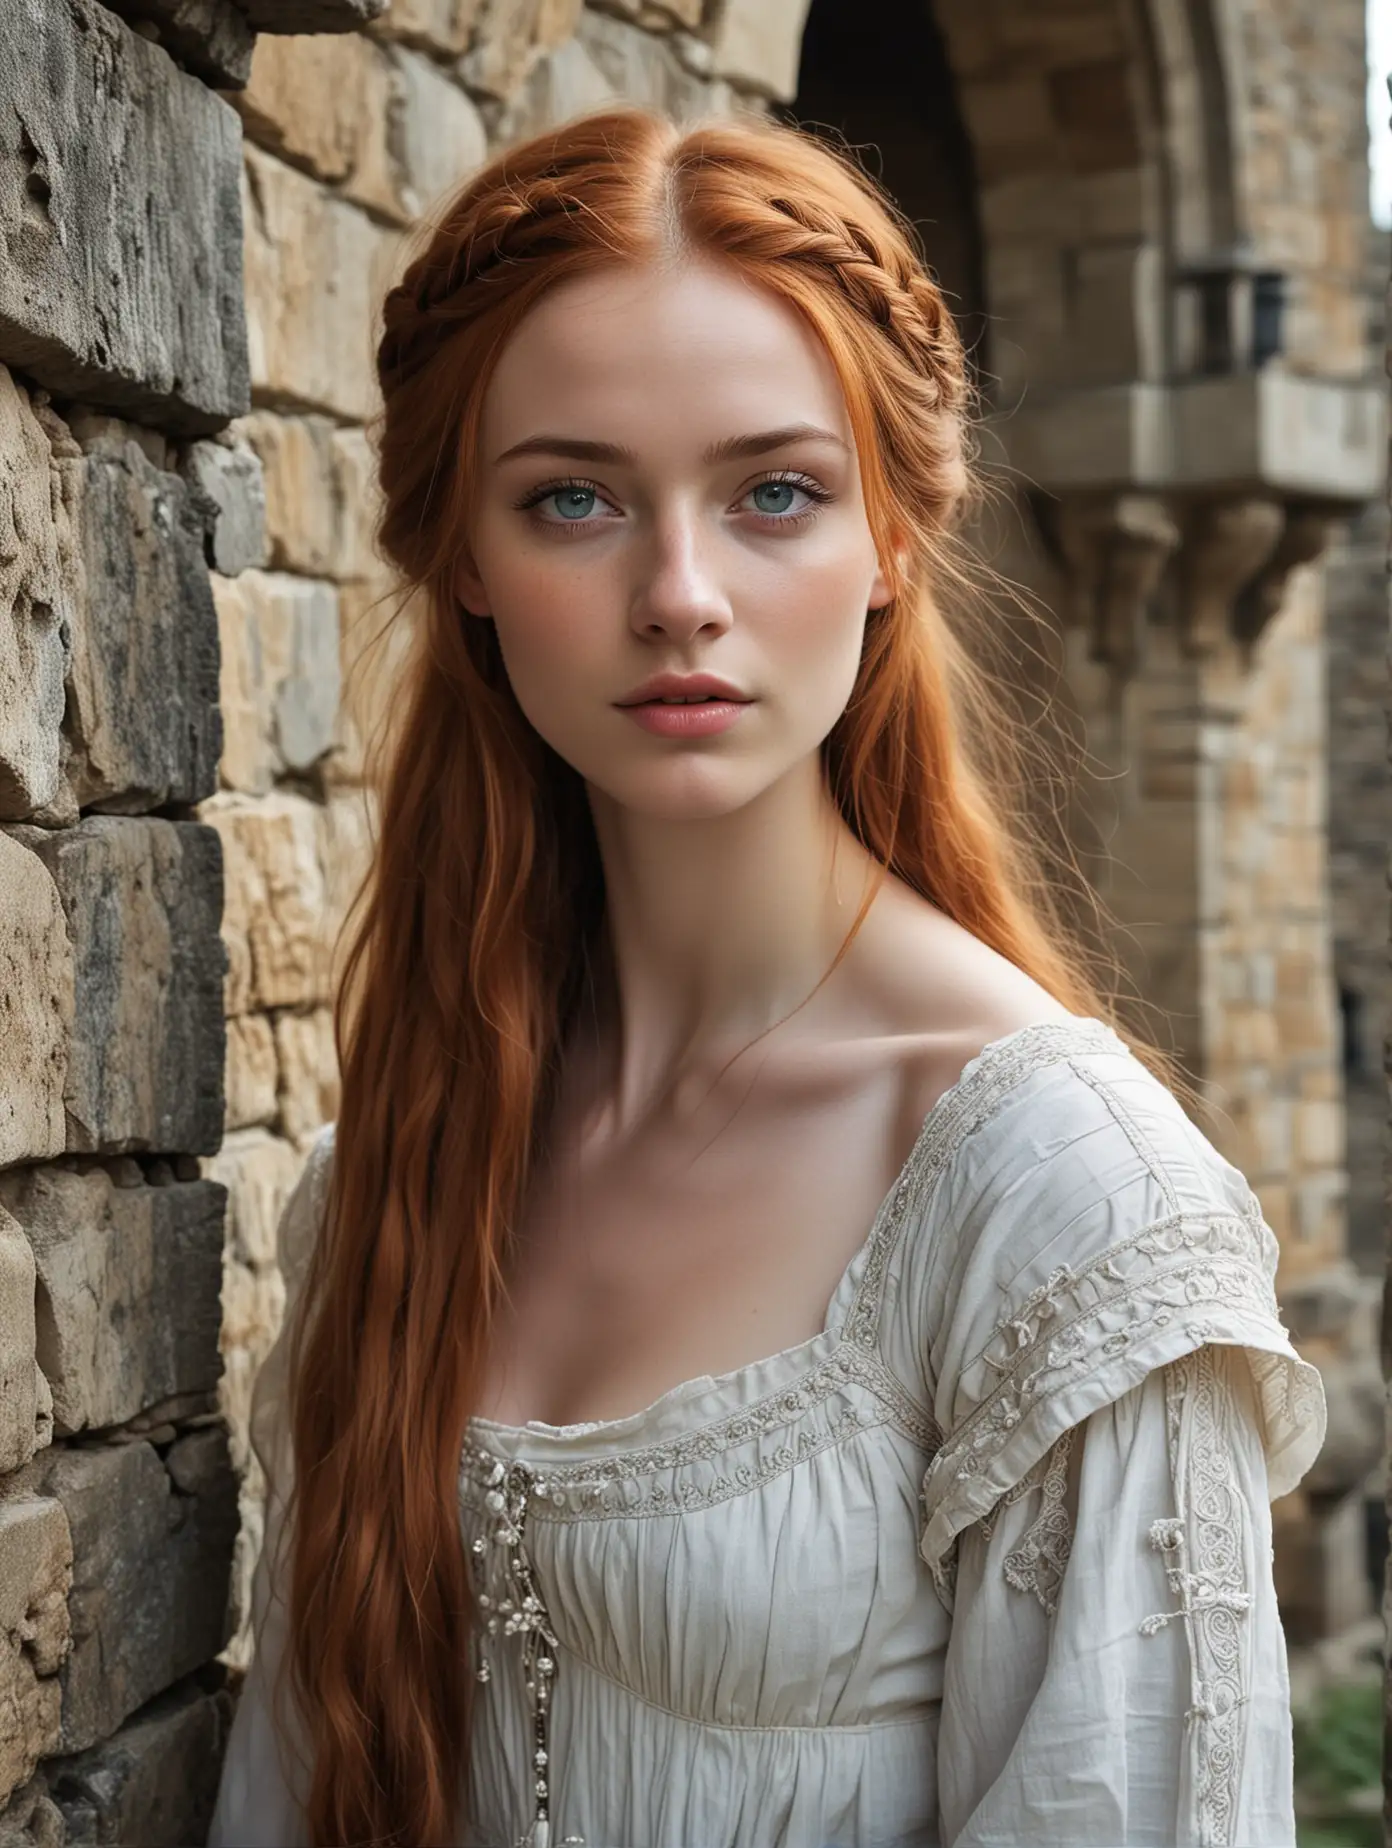 Young teenage girl, long red hair loose and braided, high cheekbones, deep set blue eyes, pale white skin, plump lips, hollow cheeks, thick eyelashes, slender and skinny, medieval dress with fur, in a dark stone castle, fantasy setting